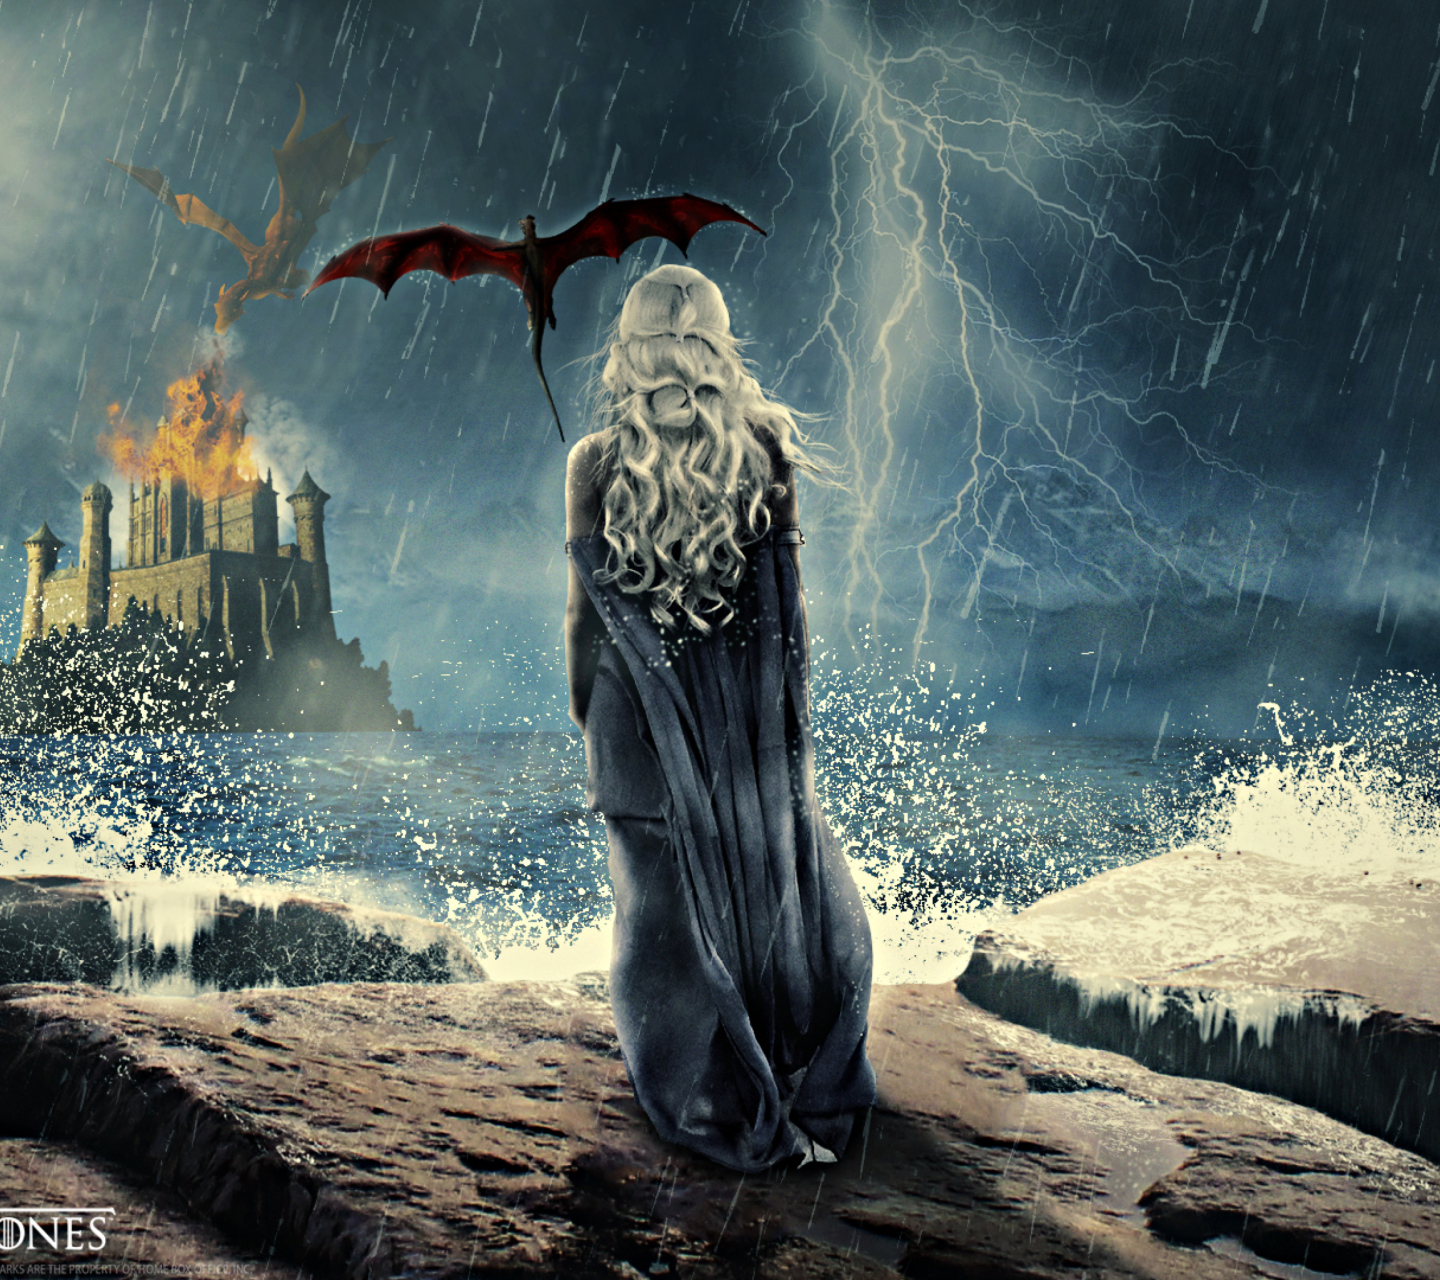 game of thrones wallpaper for android,cg artwork,sky,mythology,human,fictional character